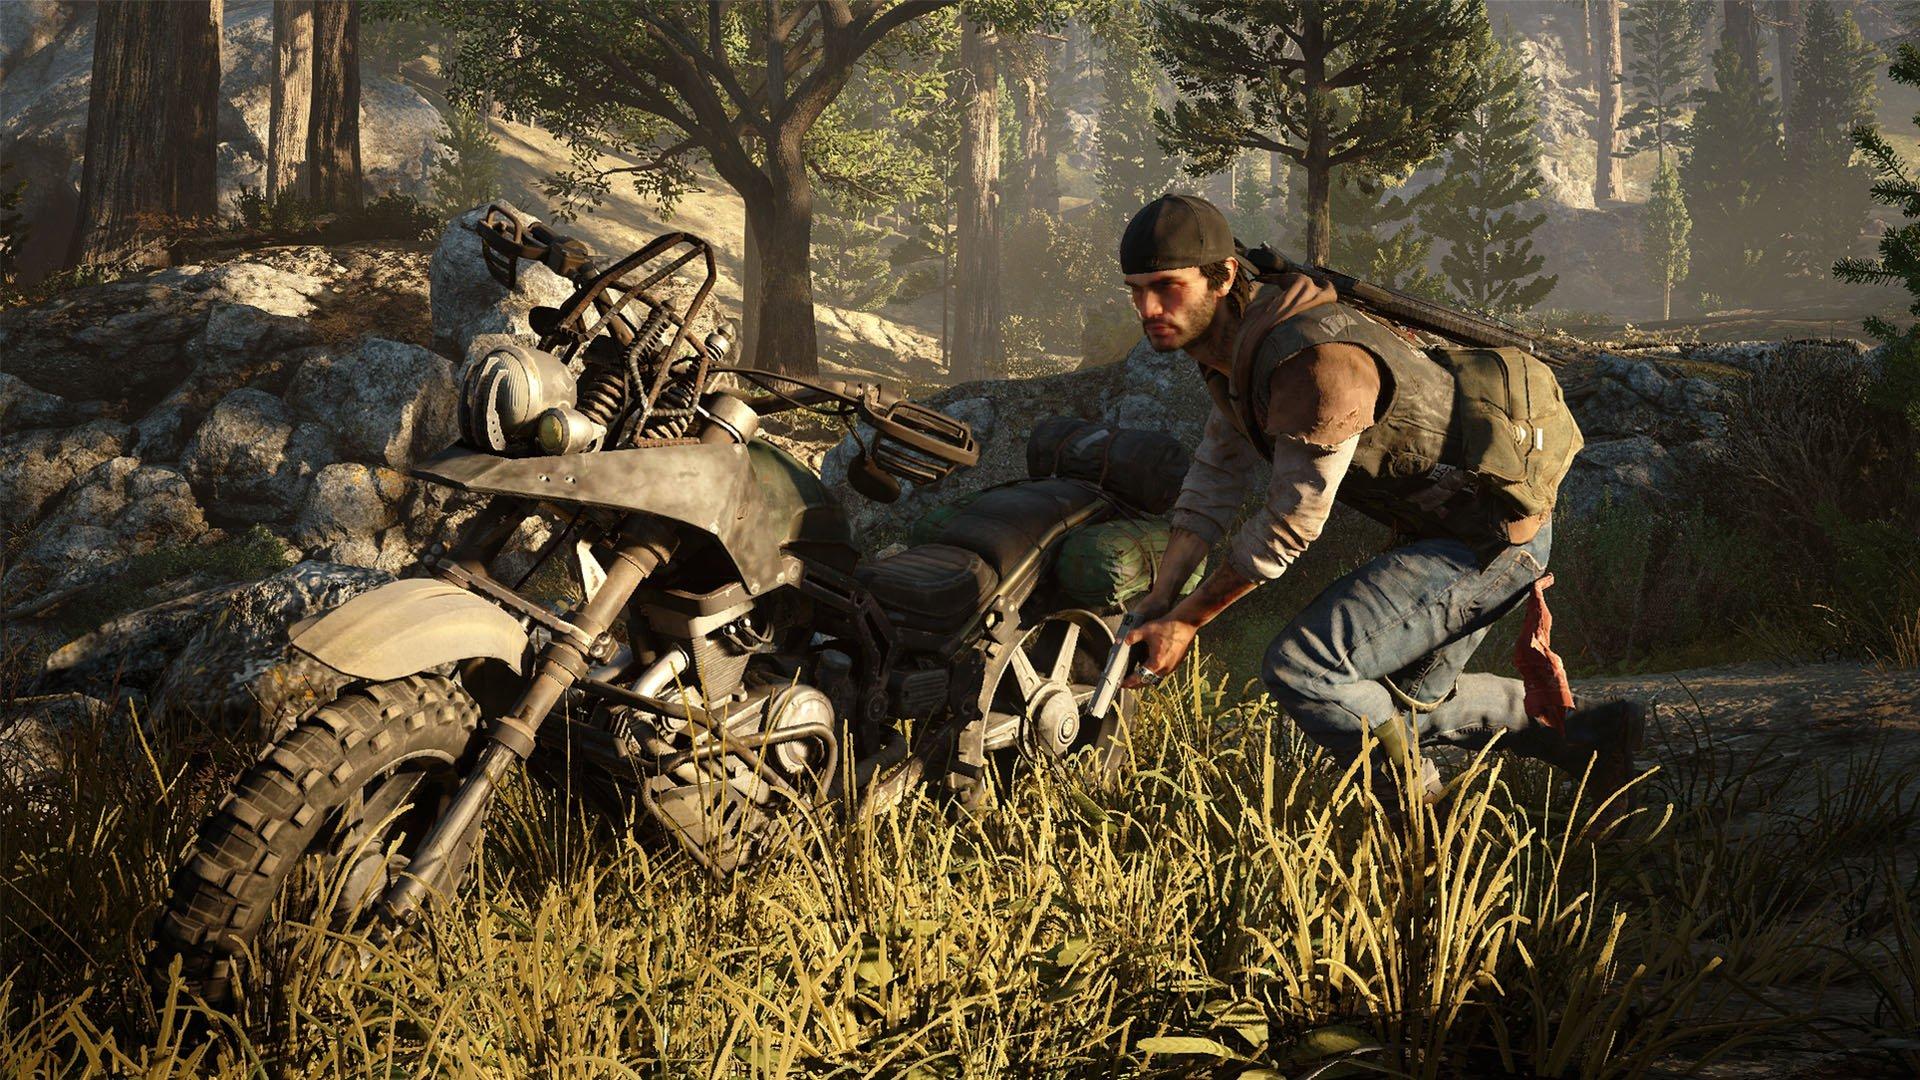  Days Gone - PlayStation 4 : Video Games